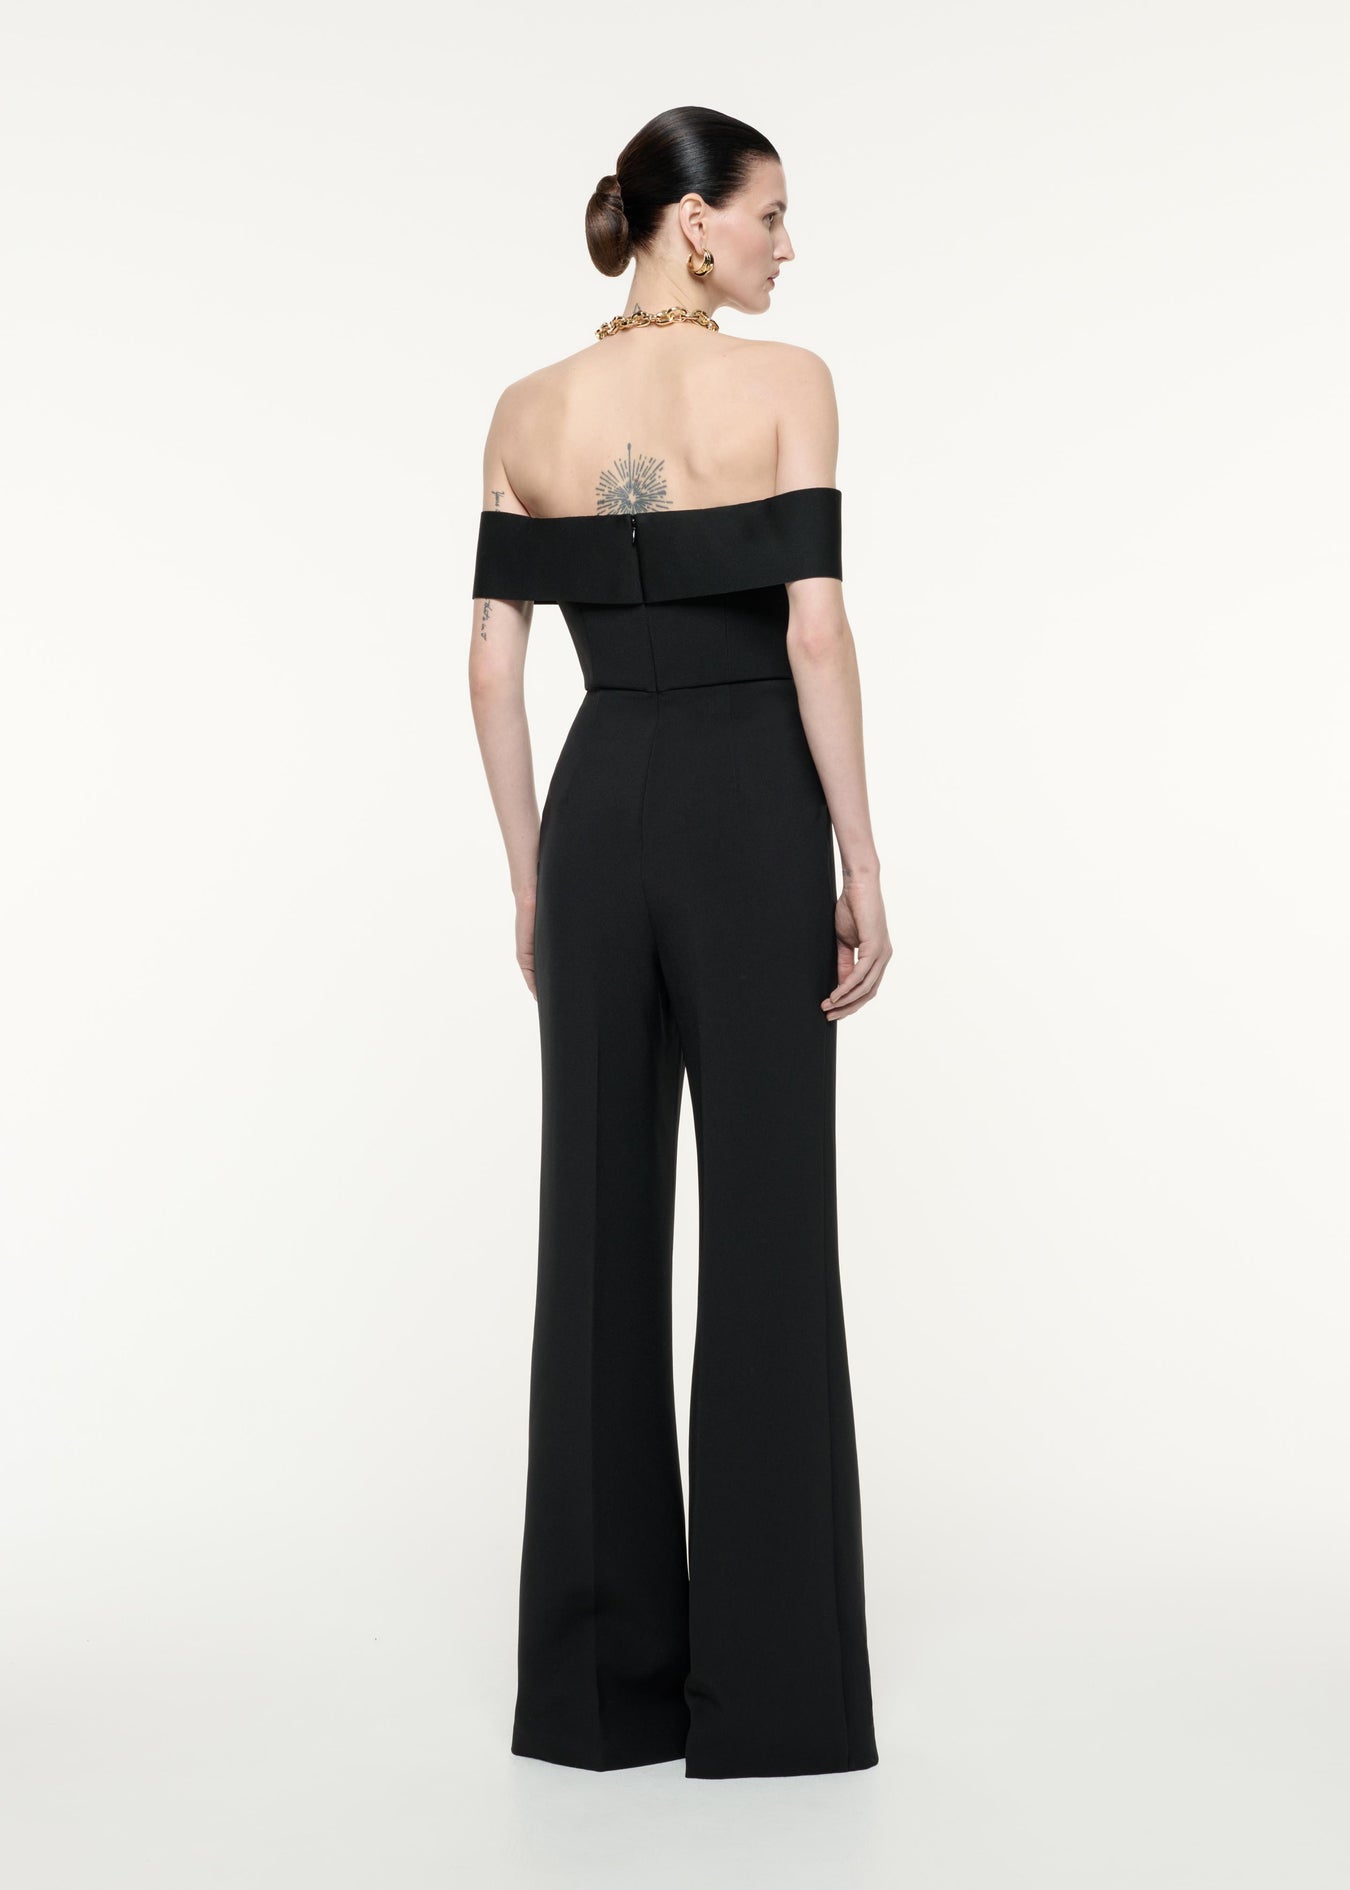 A back view image of a model wearing the Off The Shoulder Crepe Jumpsuit in Black